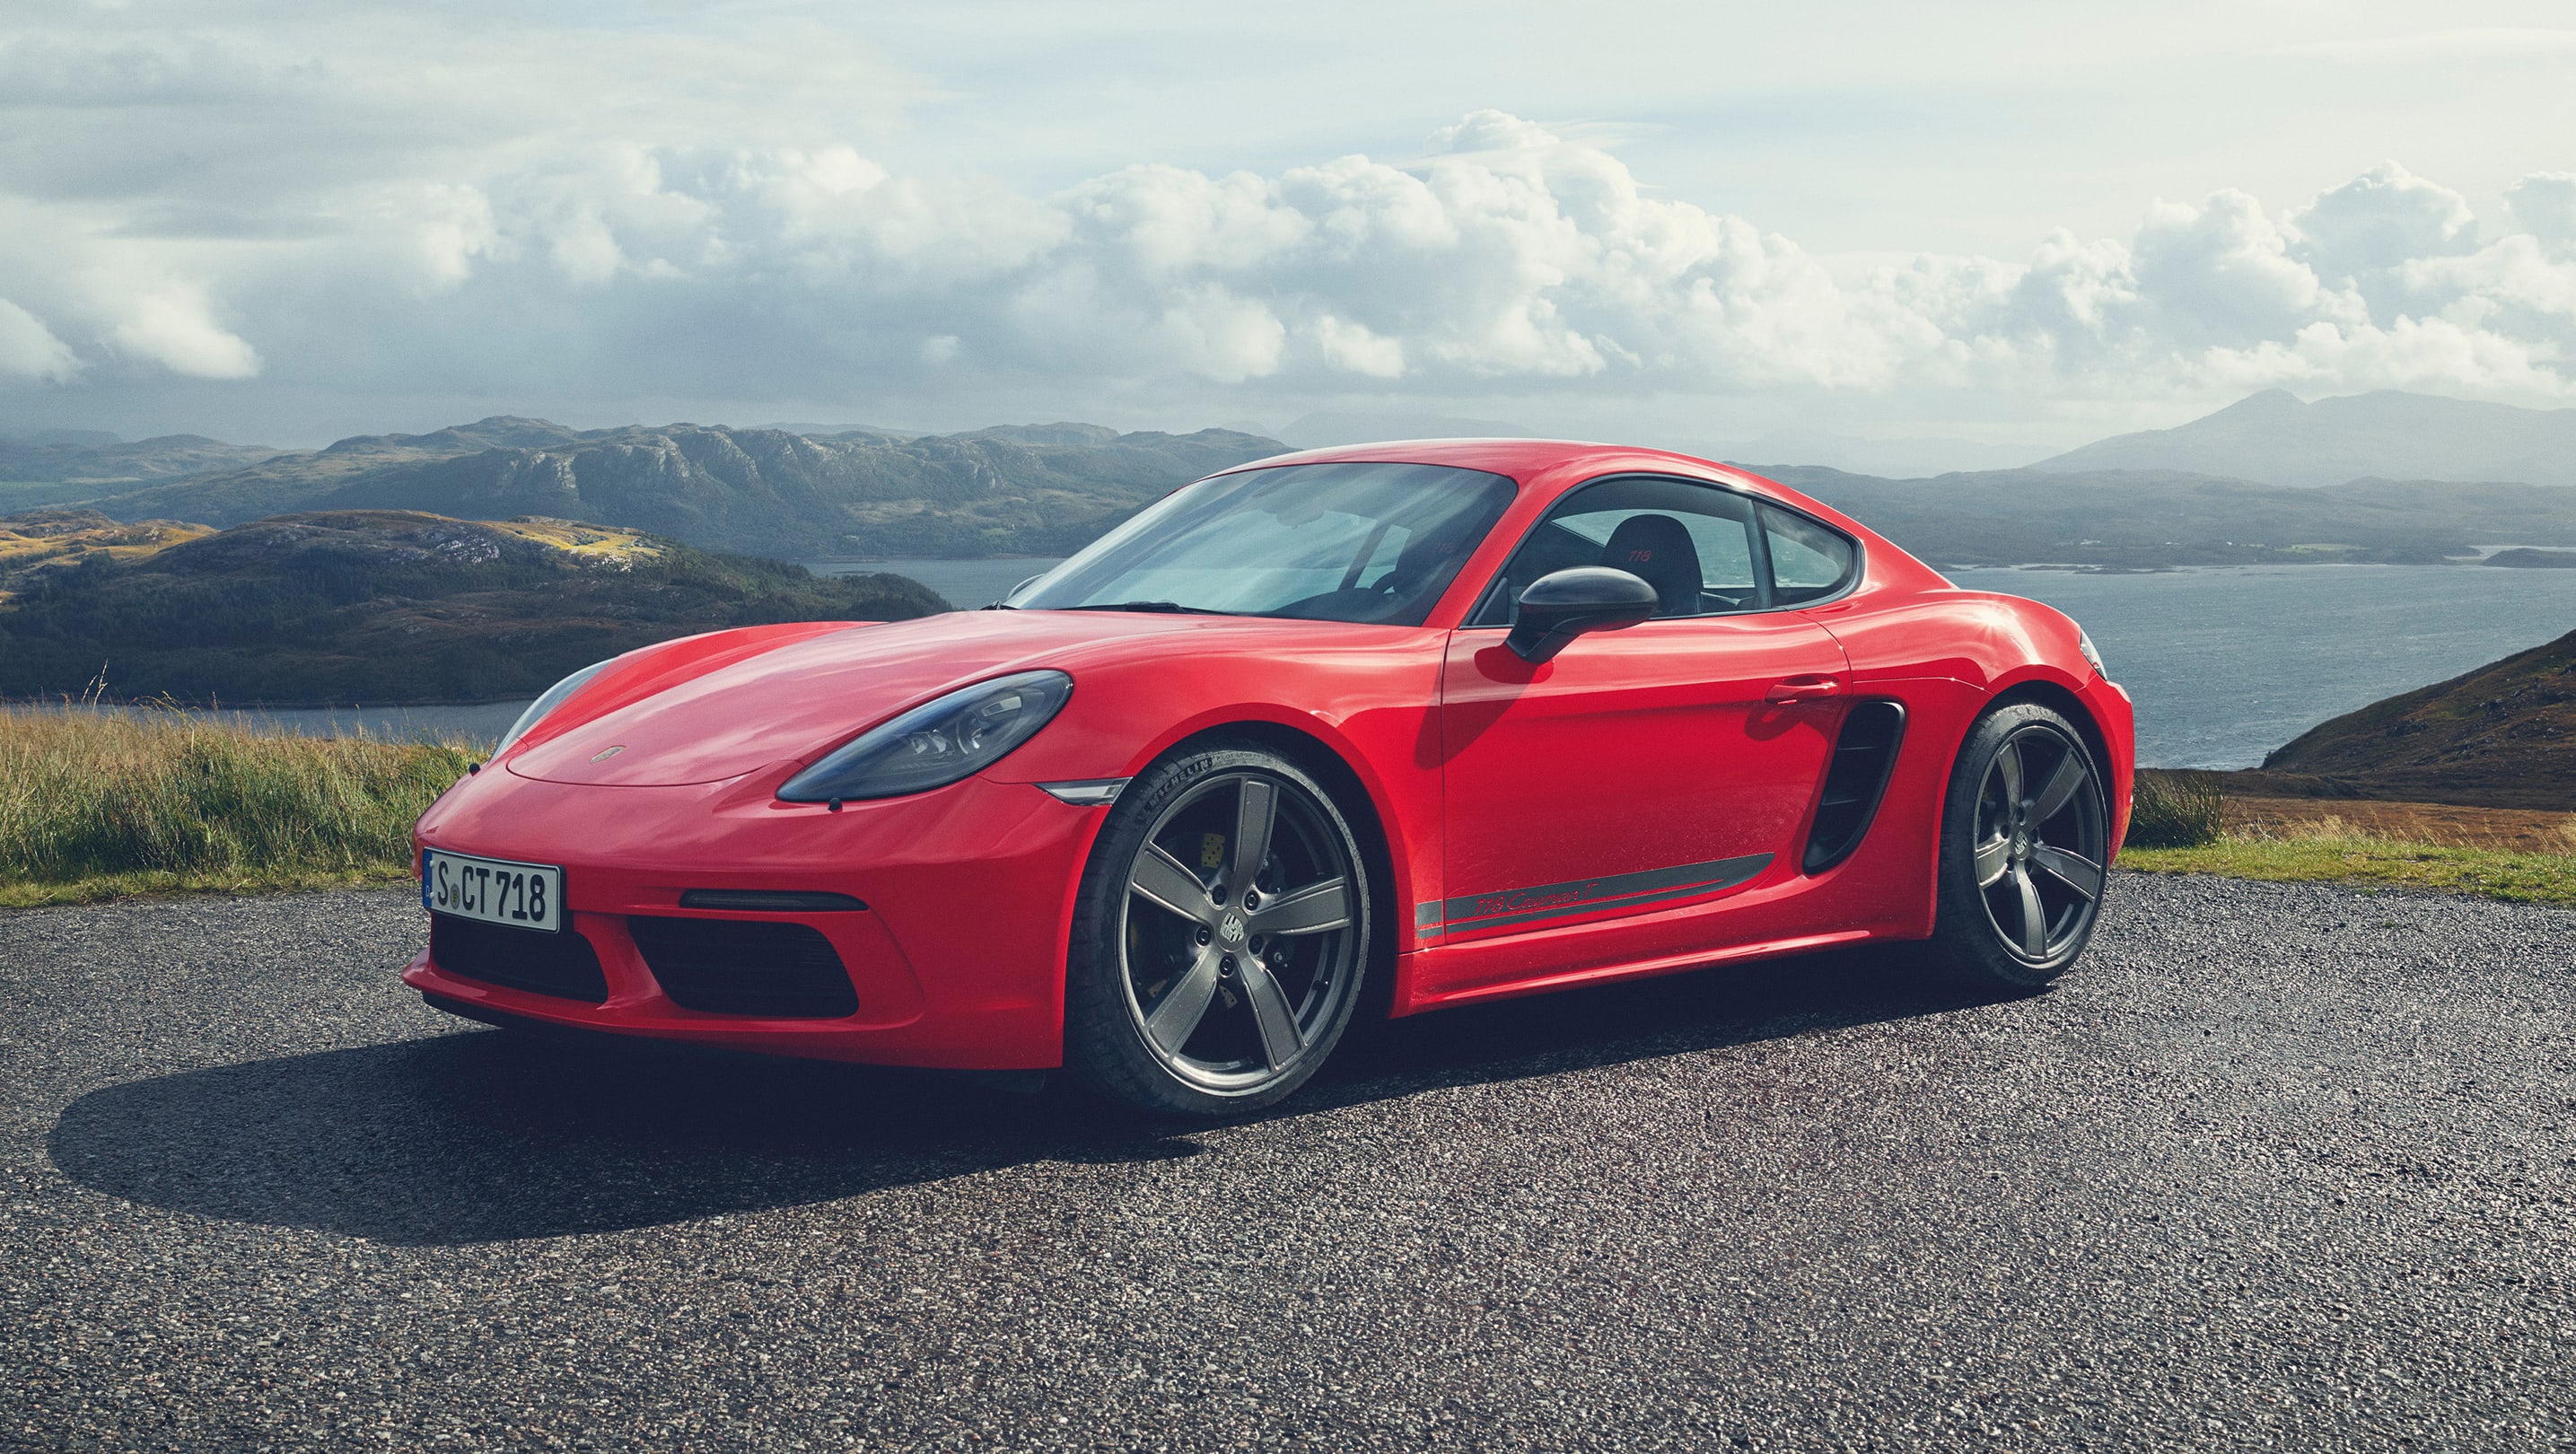 Porsche 718 Cayman and Boxster to go electric in next